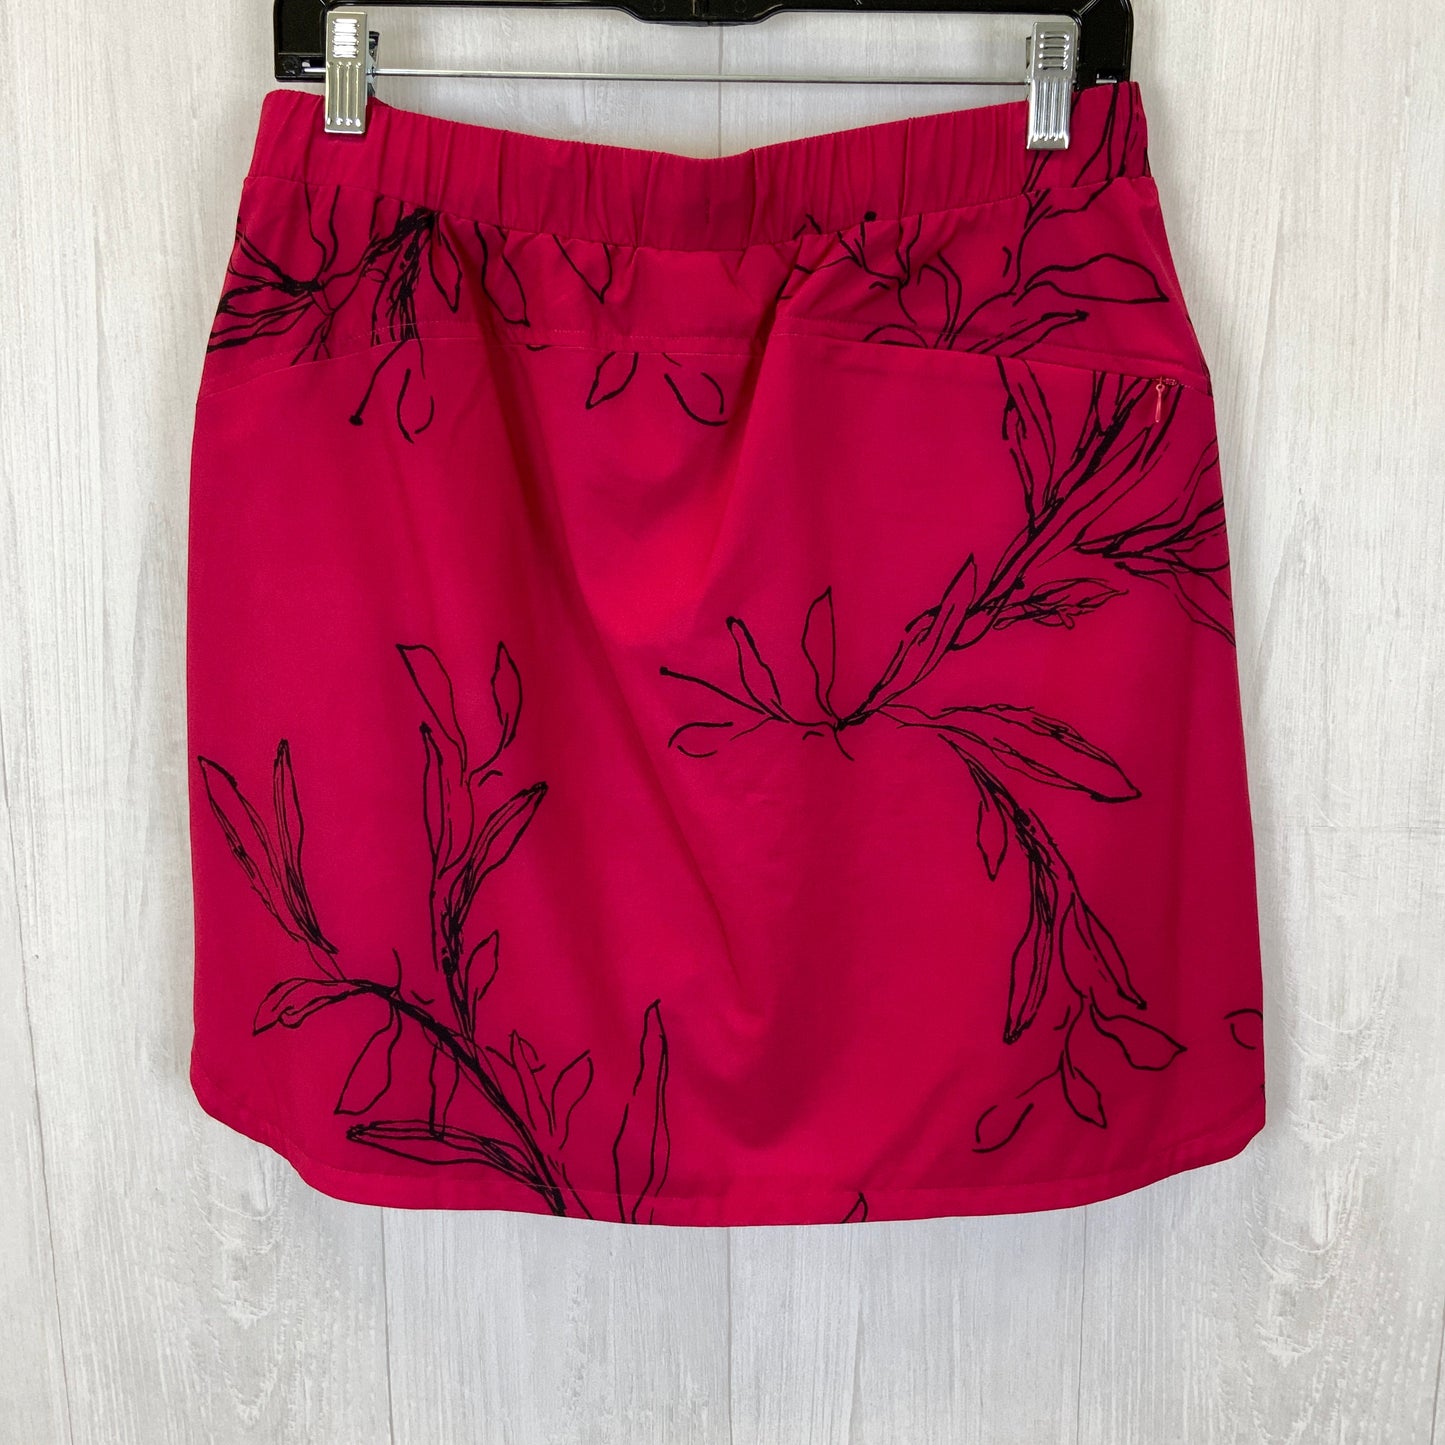 Red Athletic Skort Chicos, Size 8